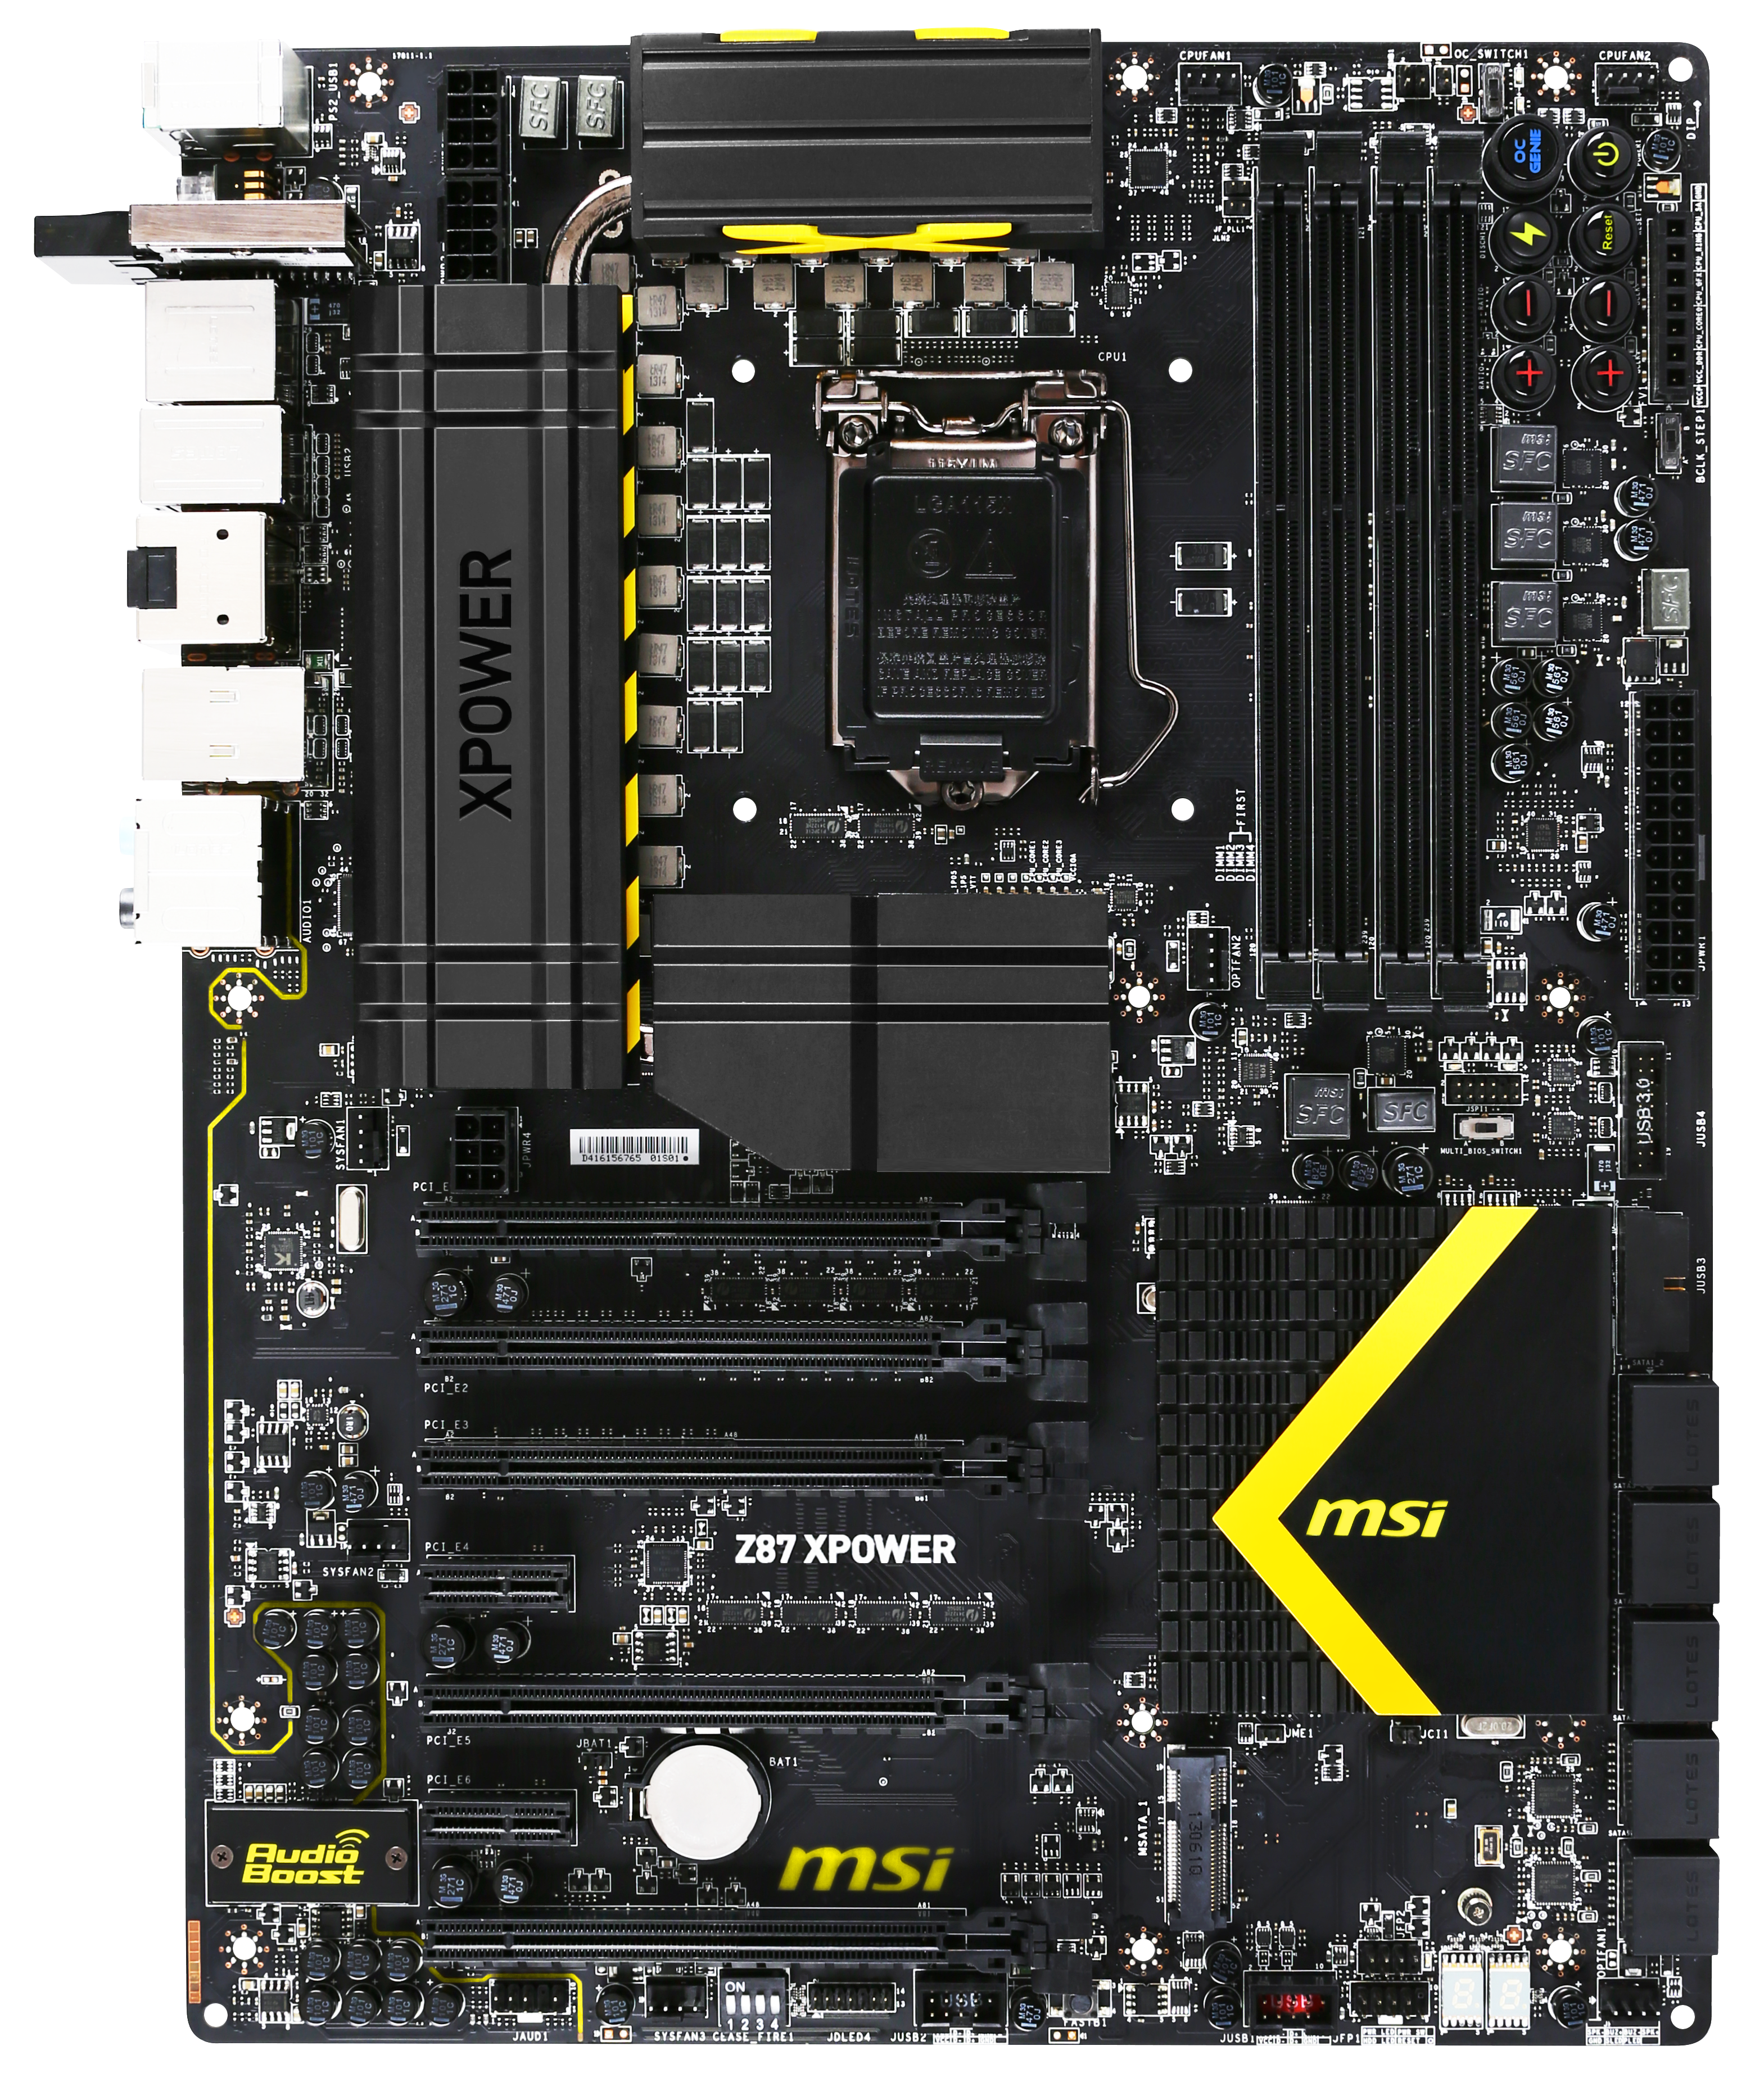 MSI%20Z87%20XPower%20-%20Top.png